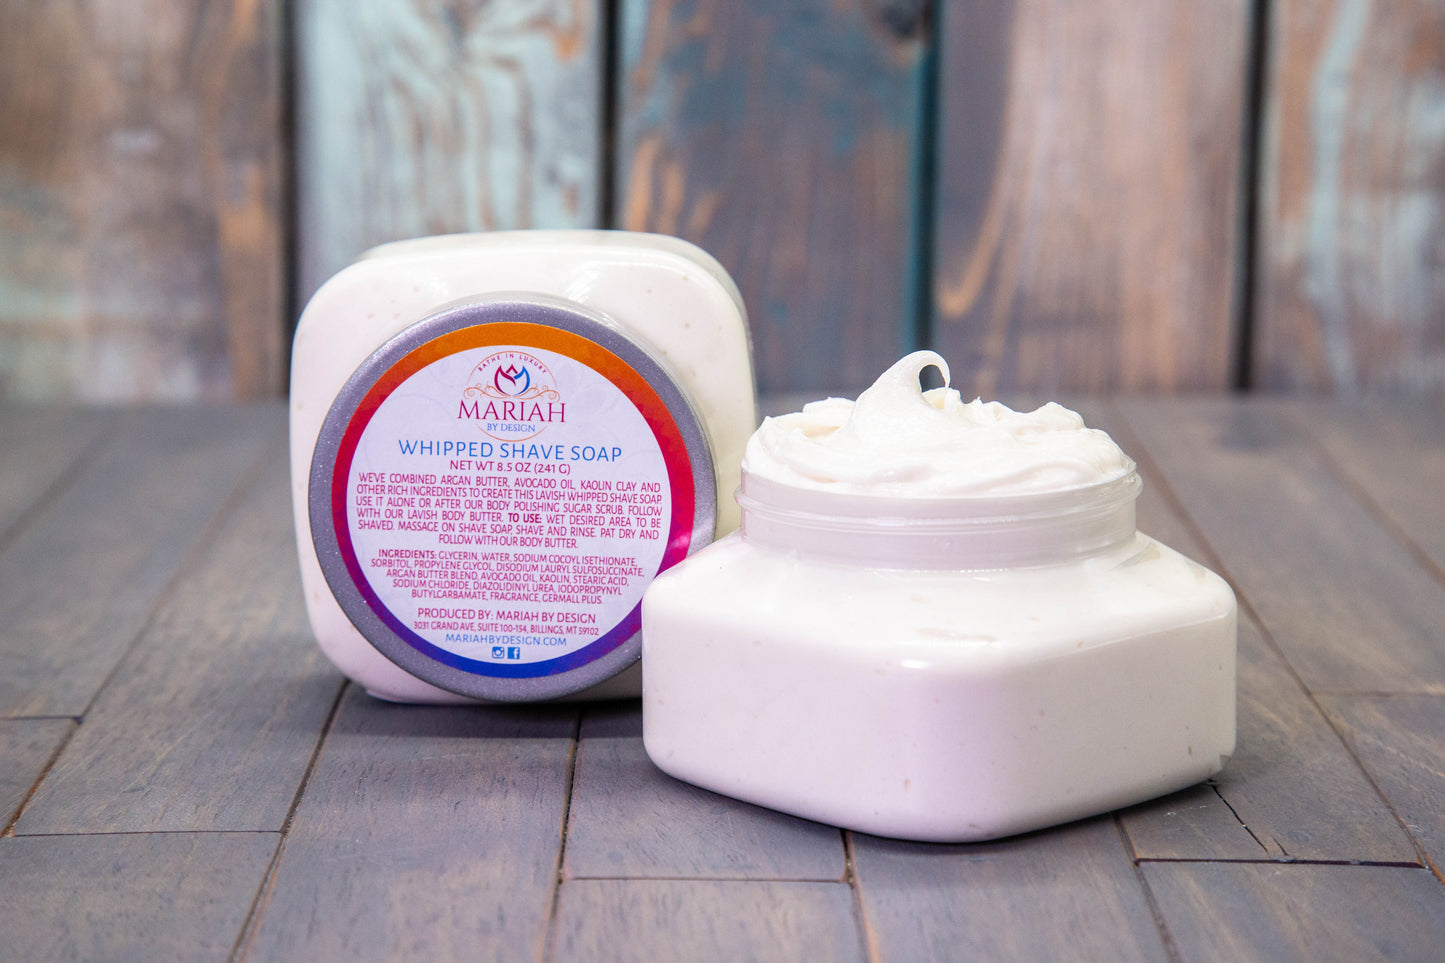 WHIPPED SHAVE SOAP